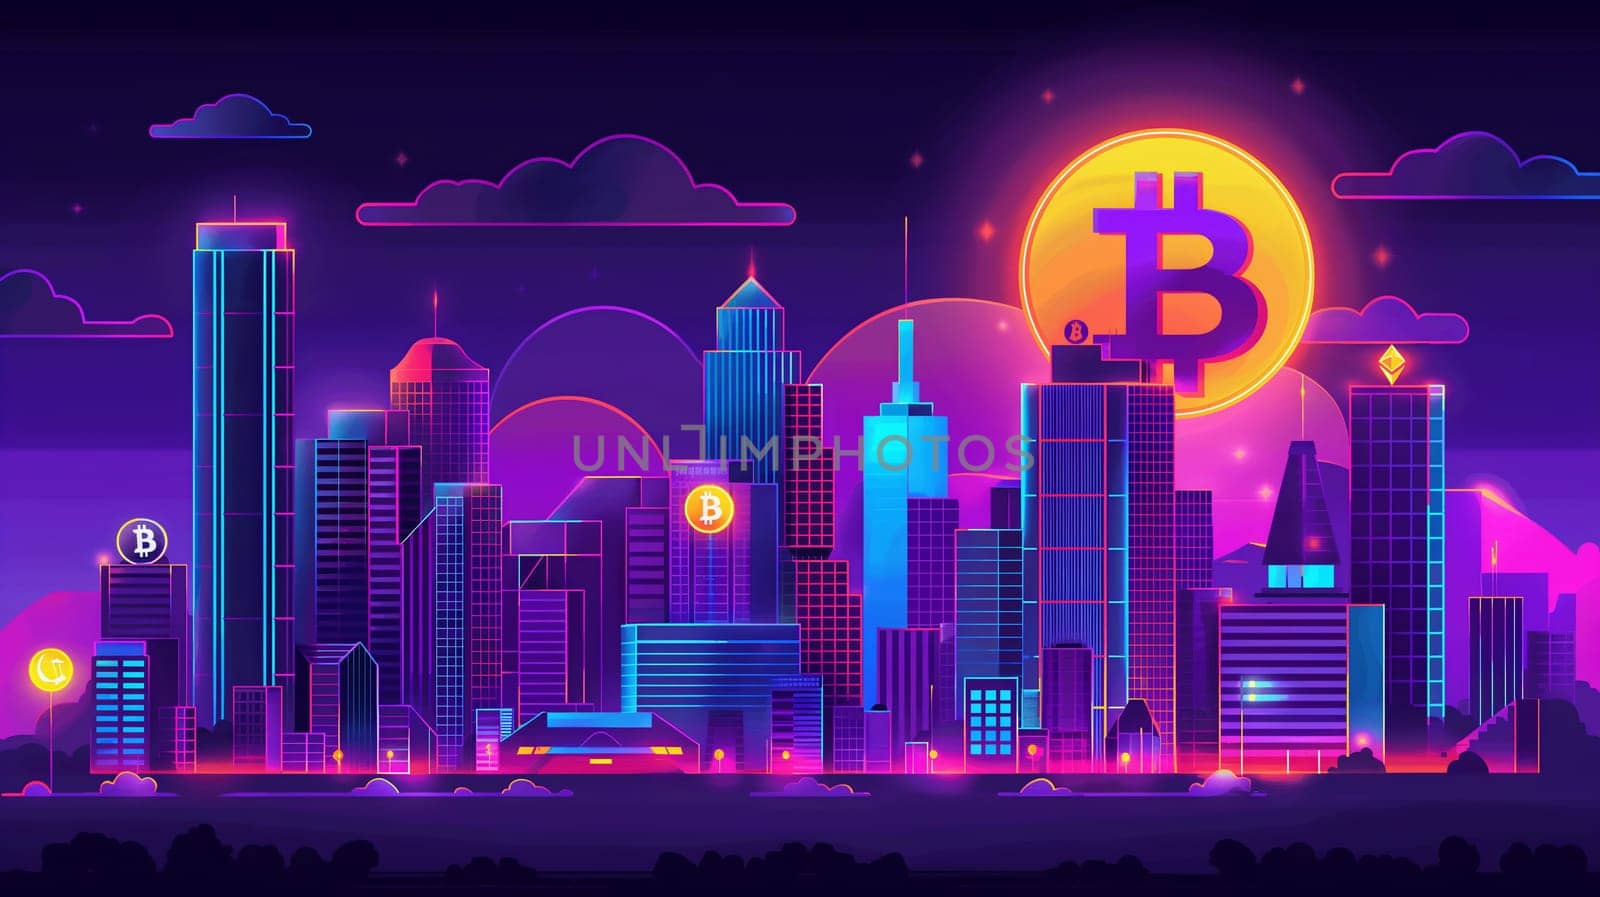 Futuristic Cityscape With Bitcoin Emblems at Night by chrisroll